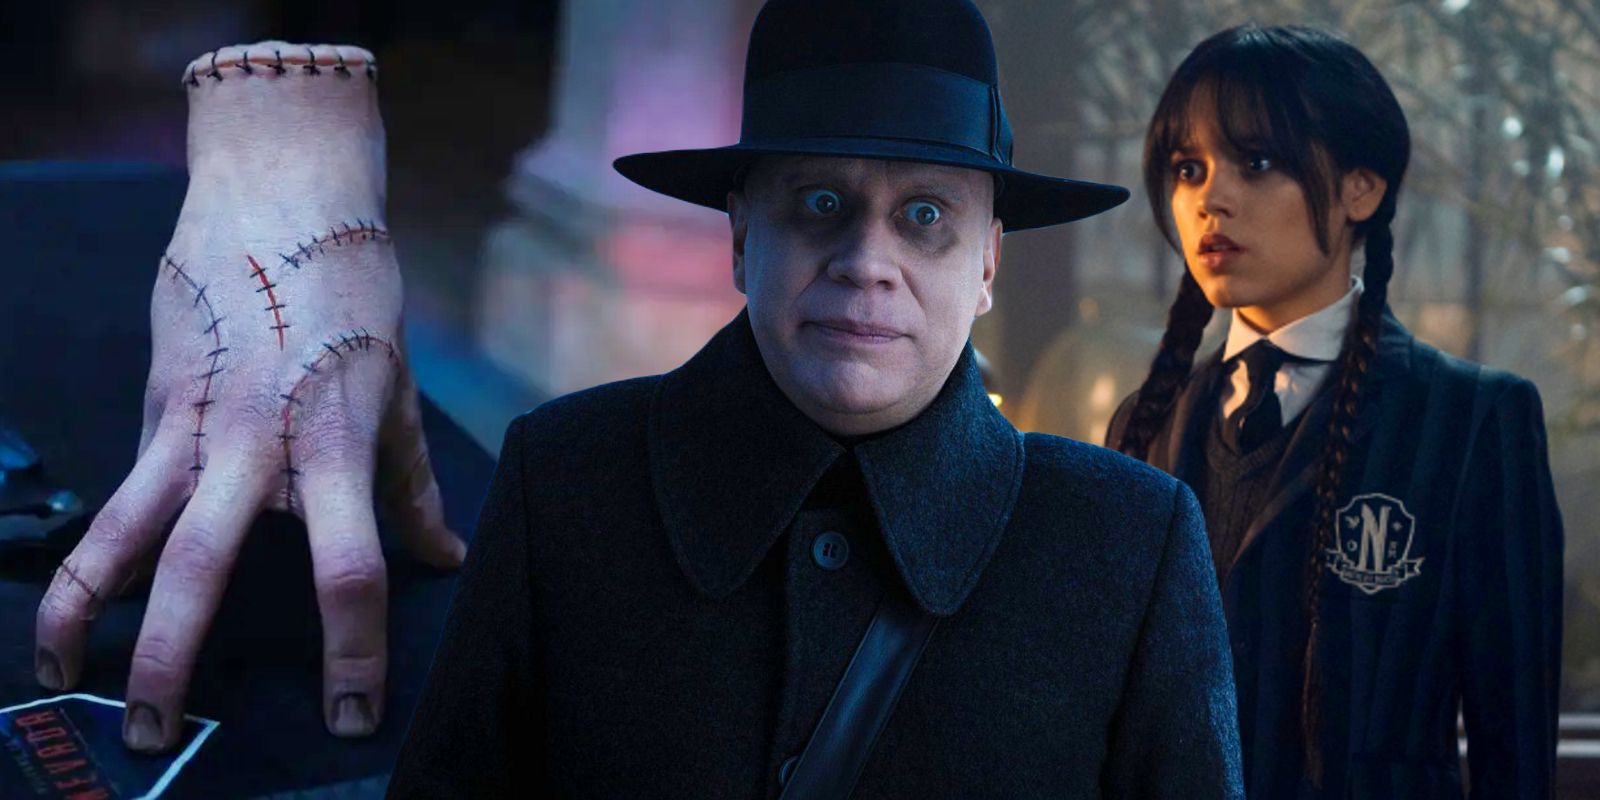 Thing, Uncle Fester, and Wednesday Addams in Netflix's Wednesday show